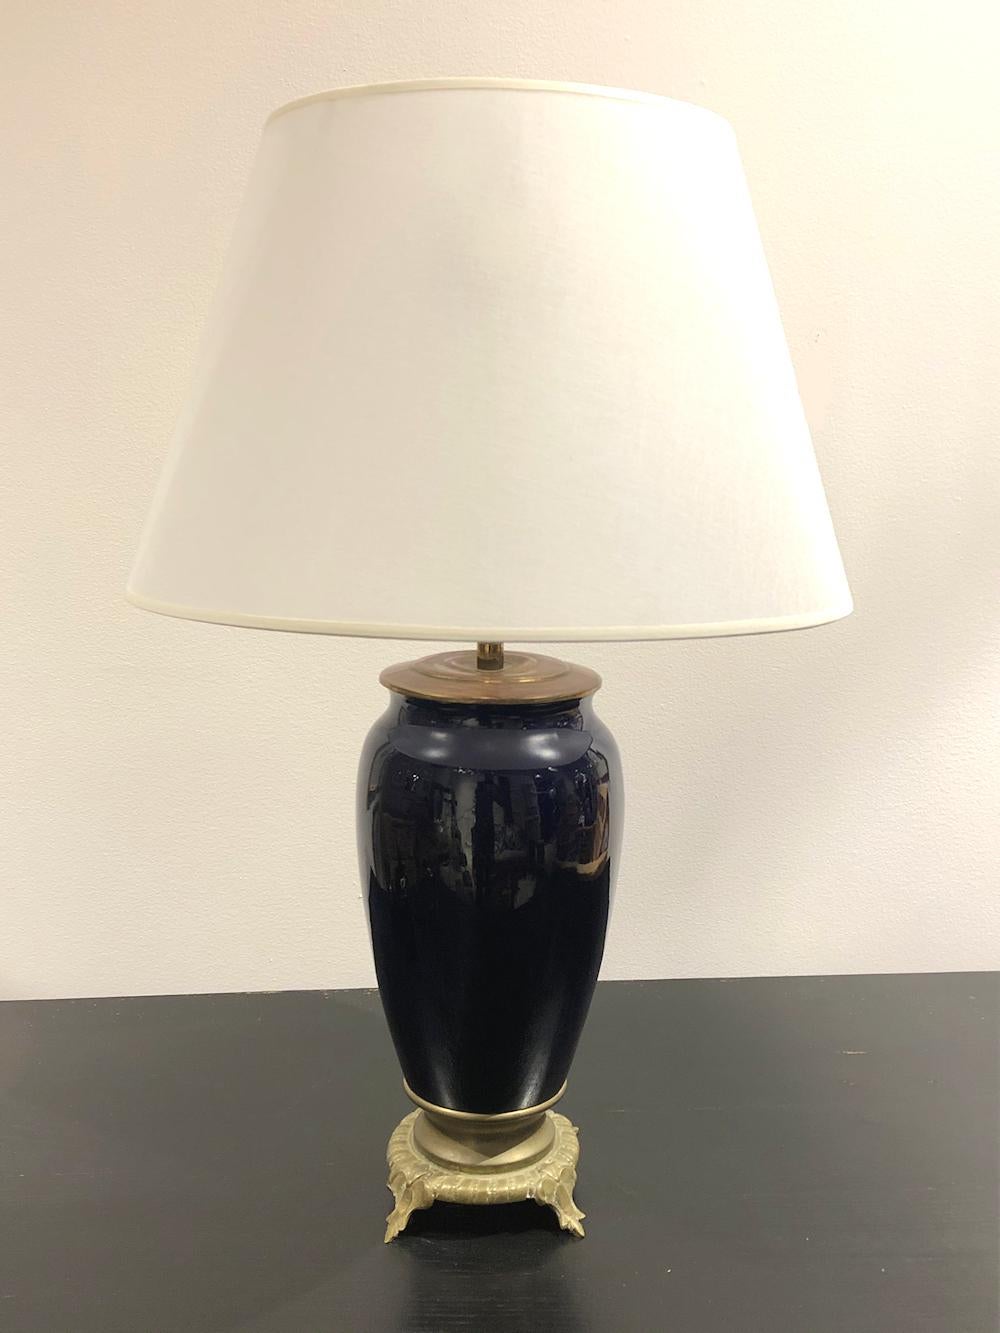 Single Mid-Century Modern dark blue ceramic and bronze base table or desk lamp, France, 1950s
Sold without the shade.
The vintage lamp has two lights, and is rewired for the US.
Diameter: 6.25 in.
Good vintage condition.
Classical, neoclassical